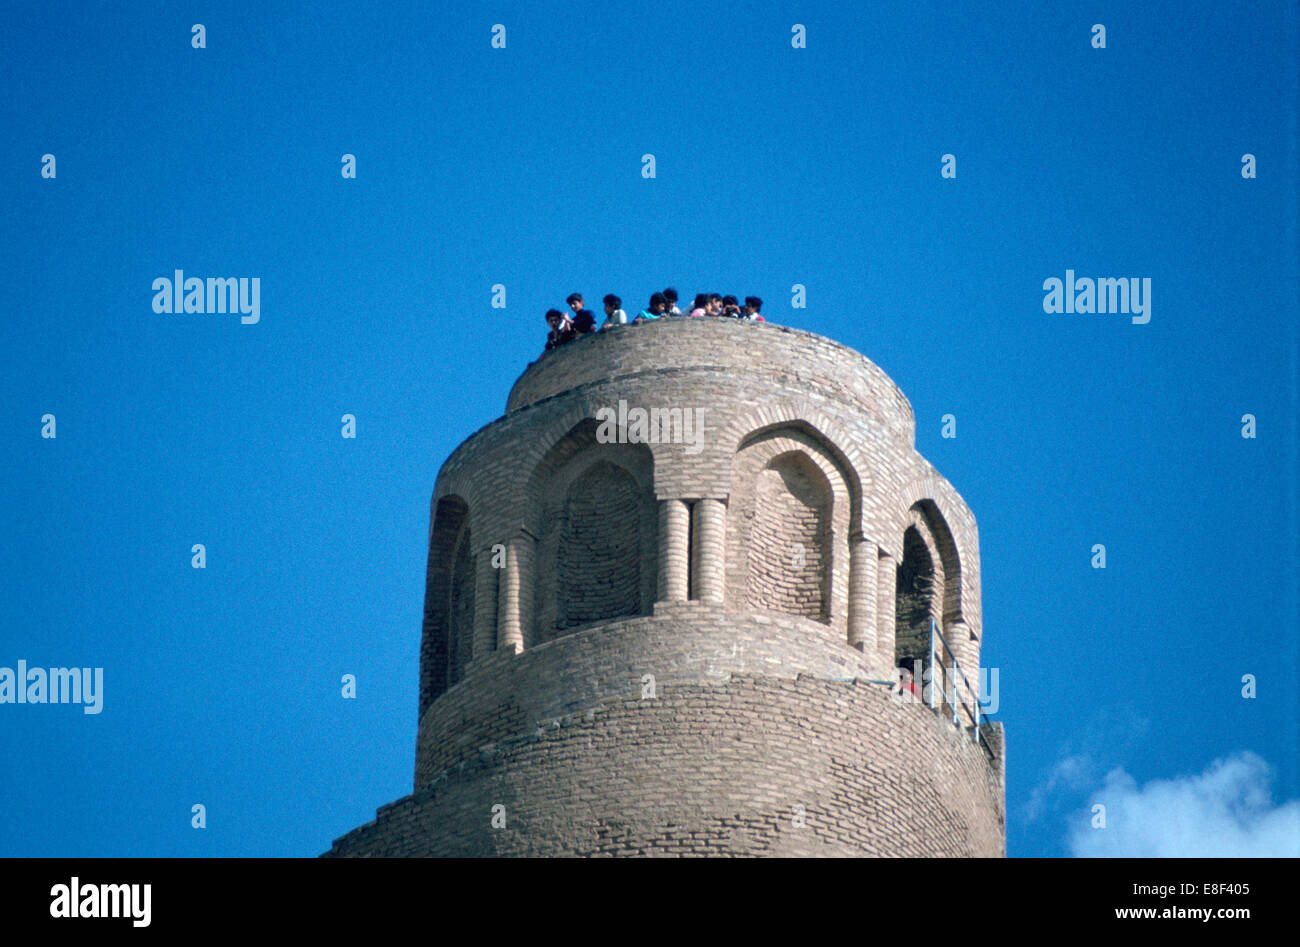 Top of the minaret of the Great Mosque, Samarra, Iraq, 1977. Stock Photo